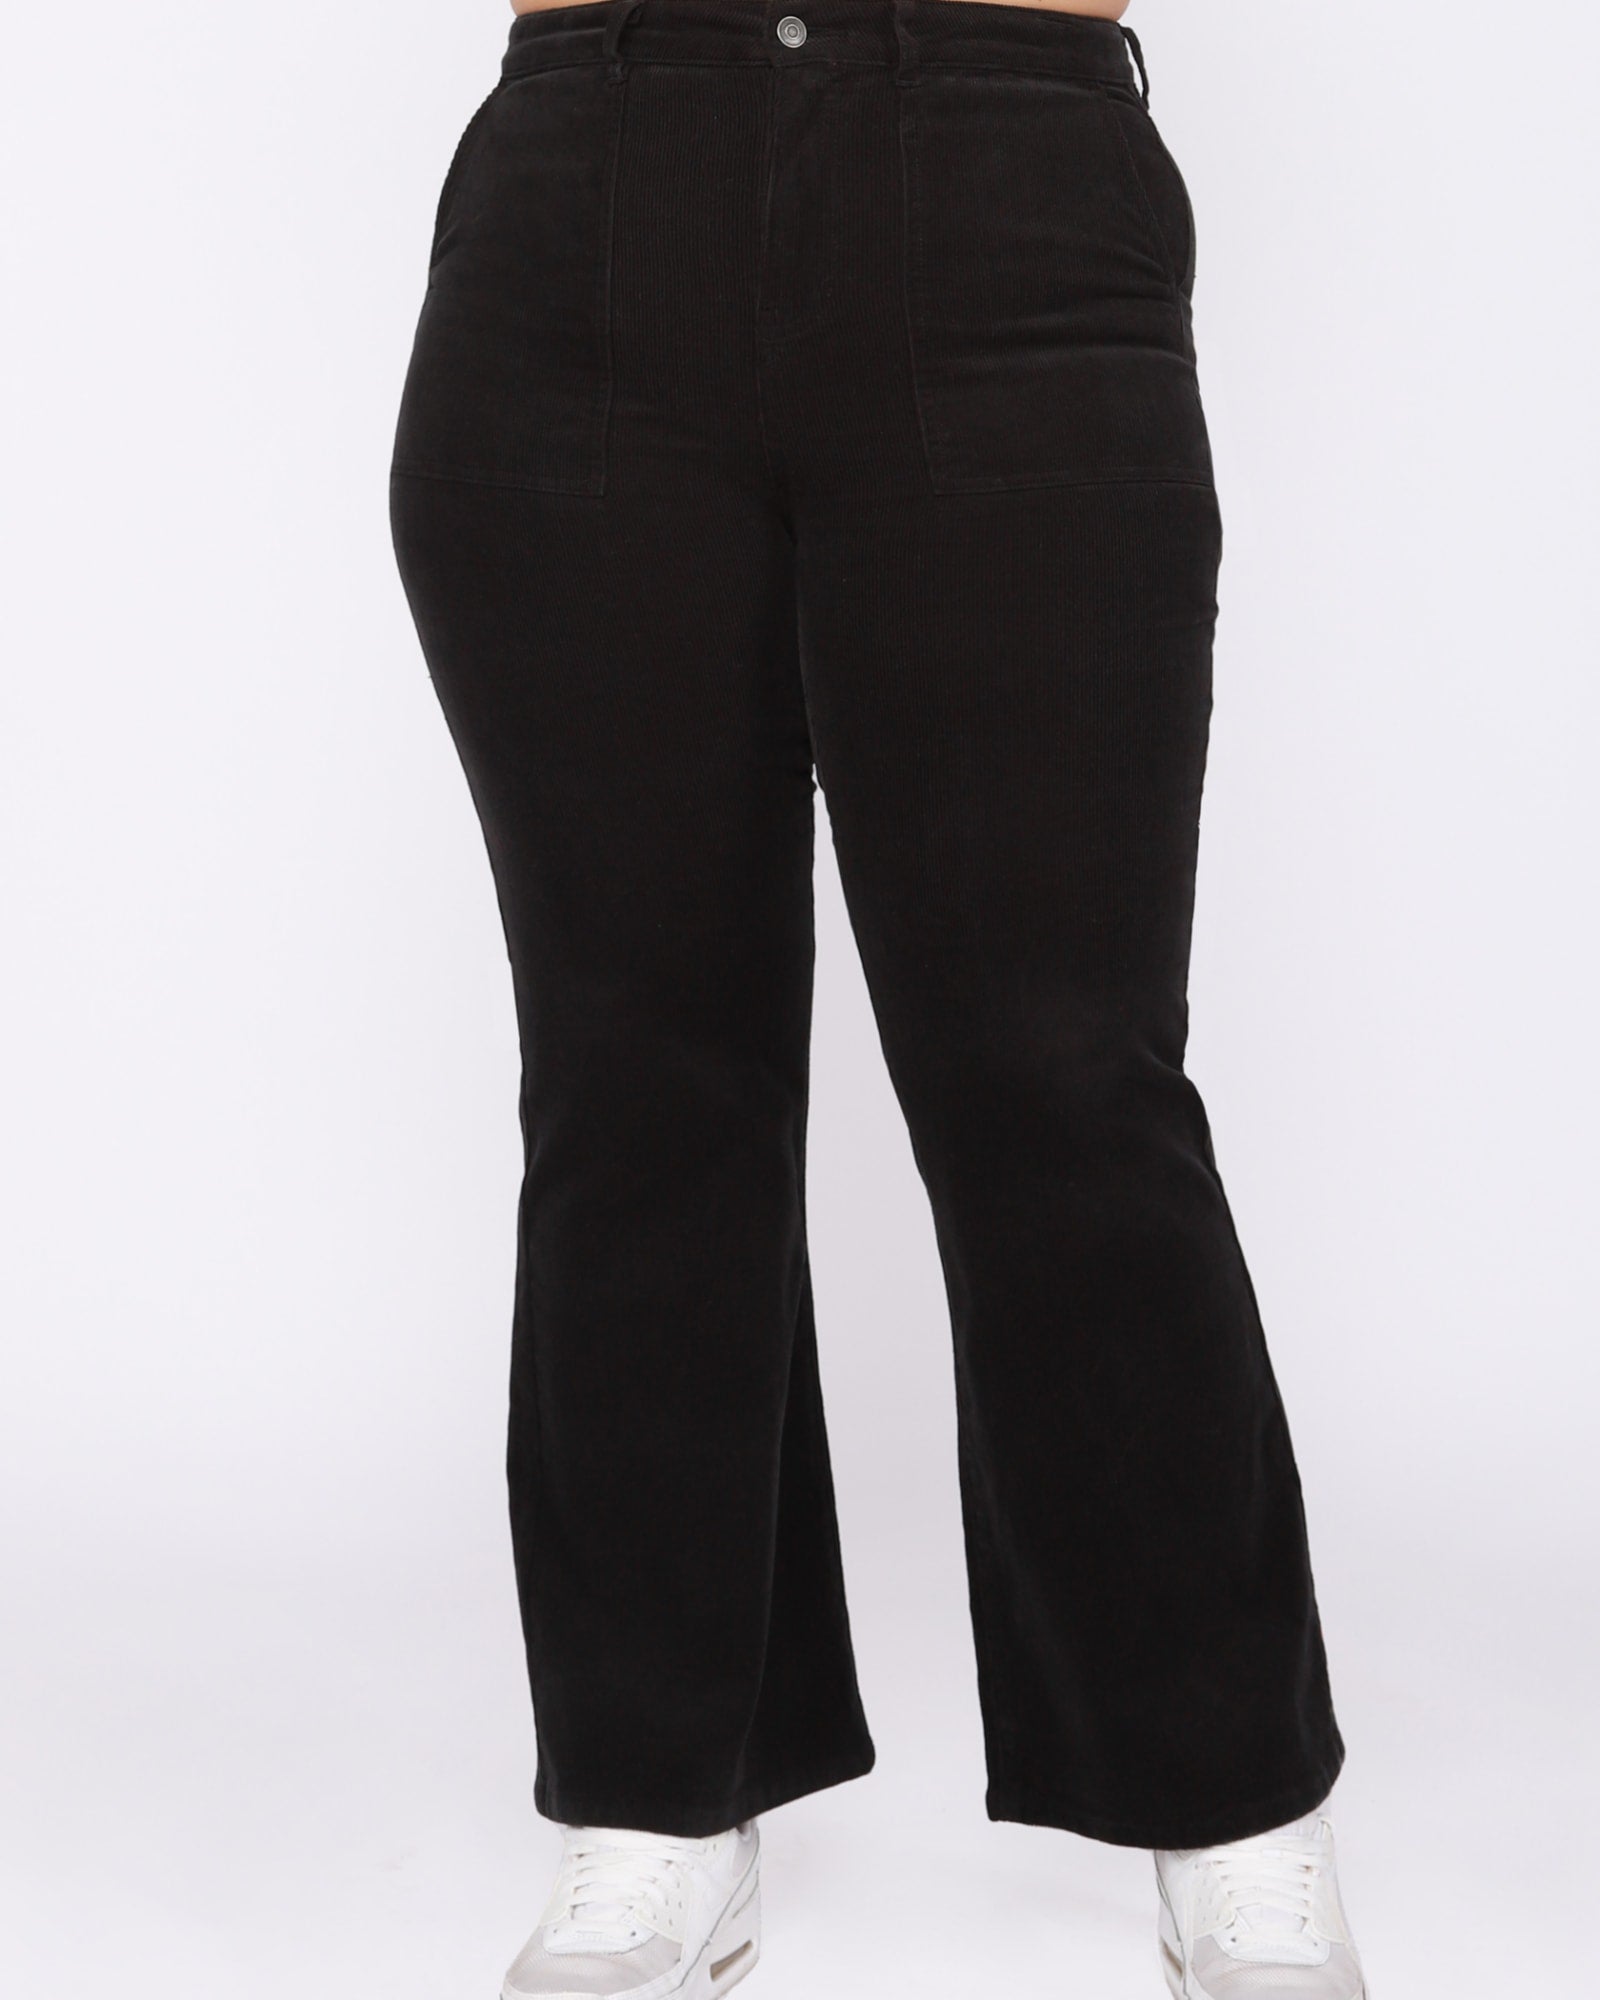 Topshop Curve stretchy corduroy flared trouser in black  ASOS